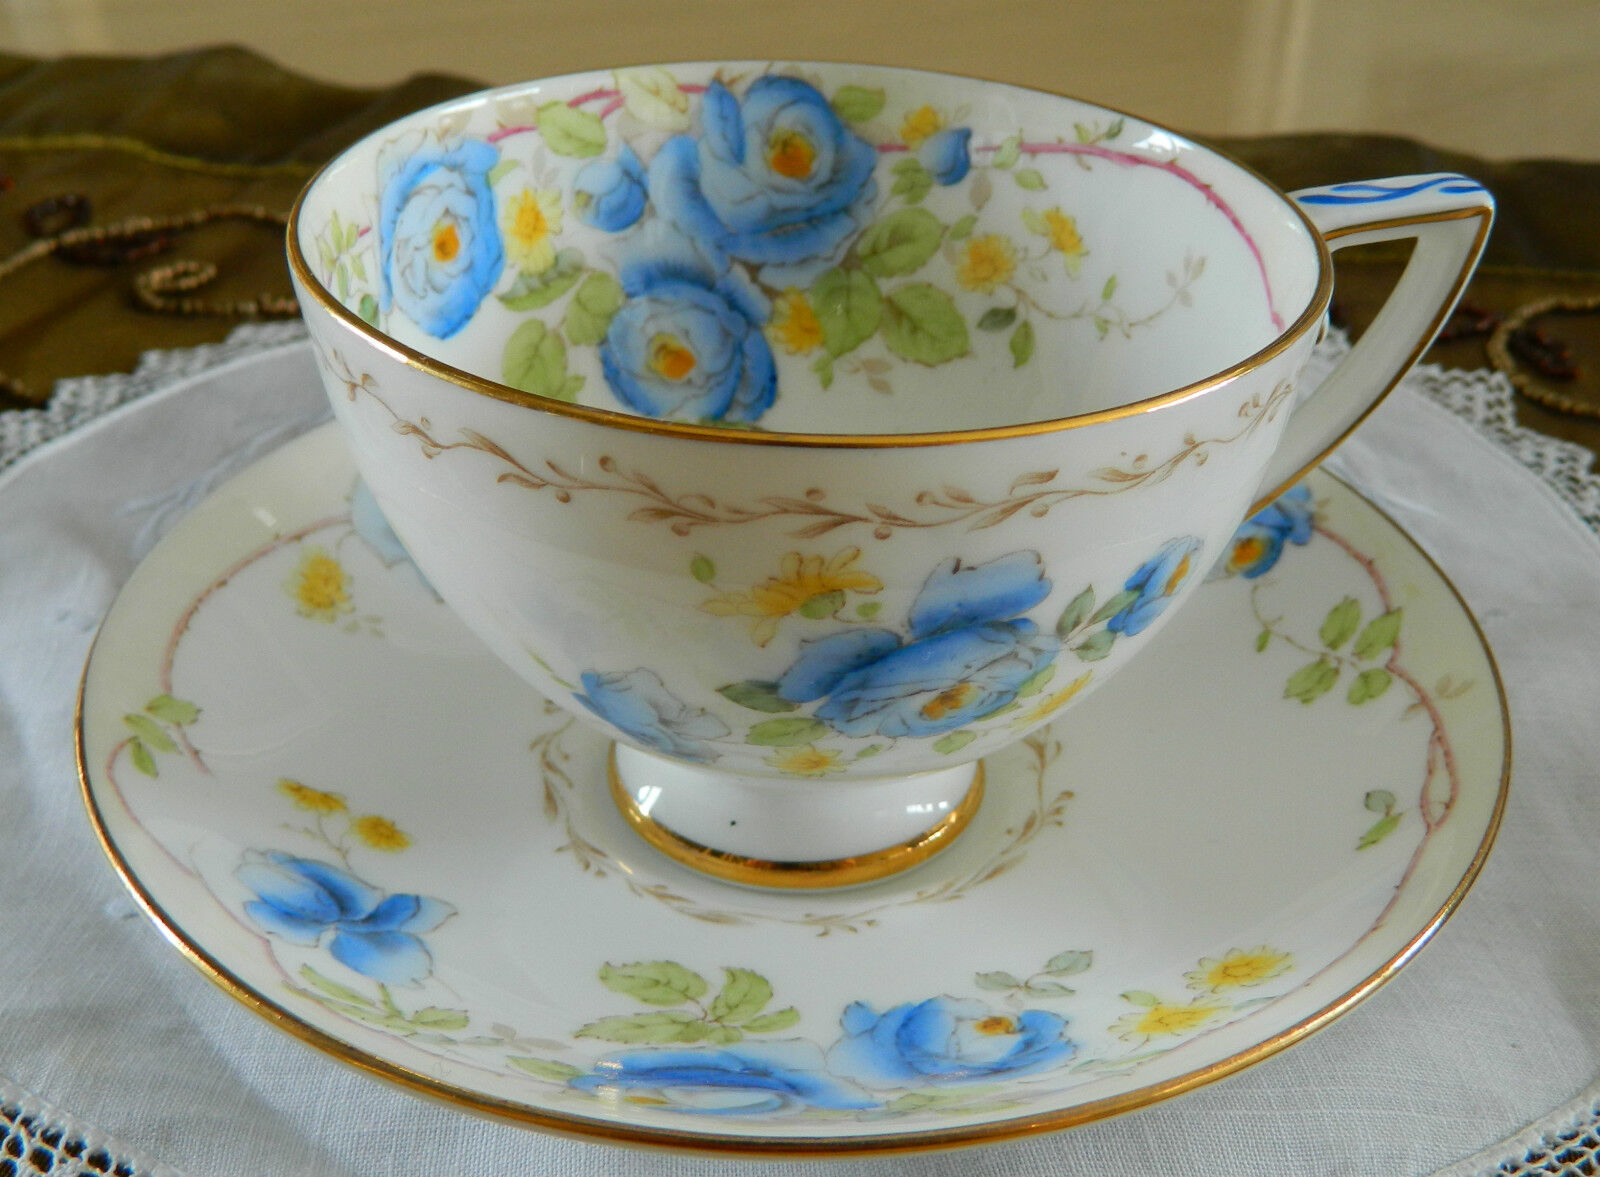 ROYAL DOULTON HANDPAINTED ROSA GOLD VINTAGE TEACUP TEA CUP AND SAUCER  England 